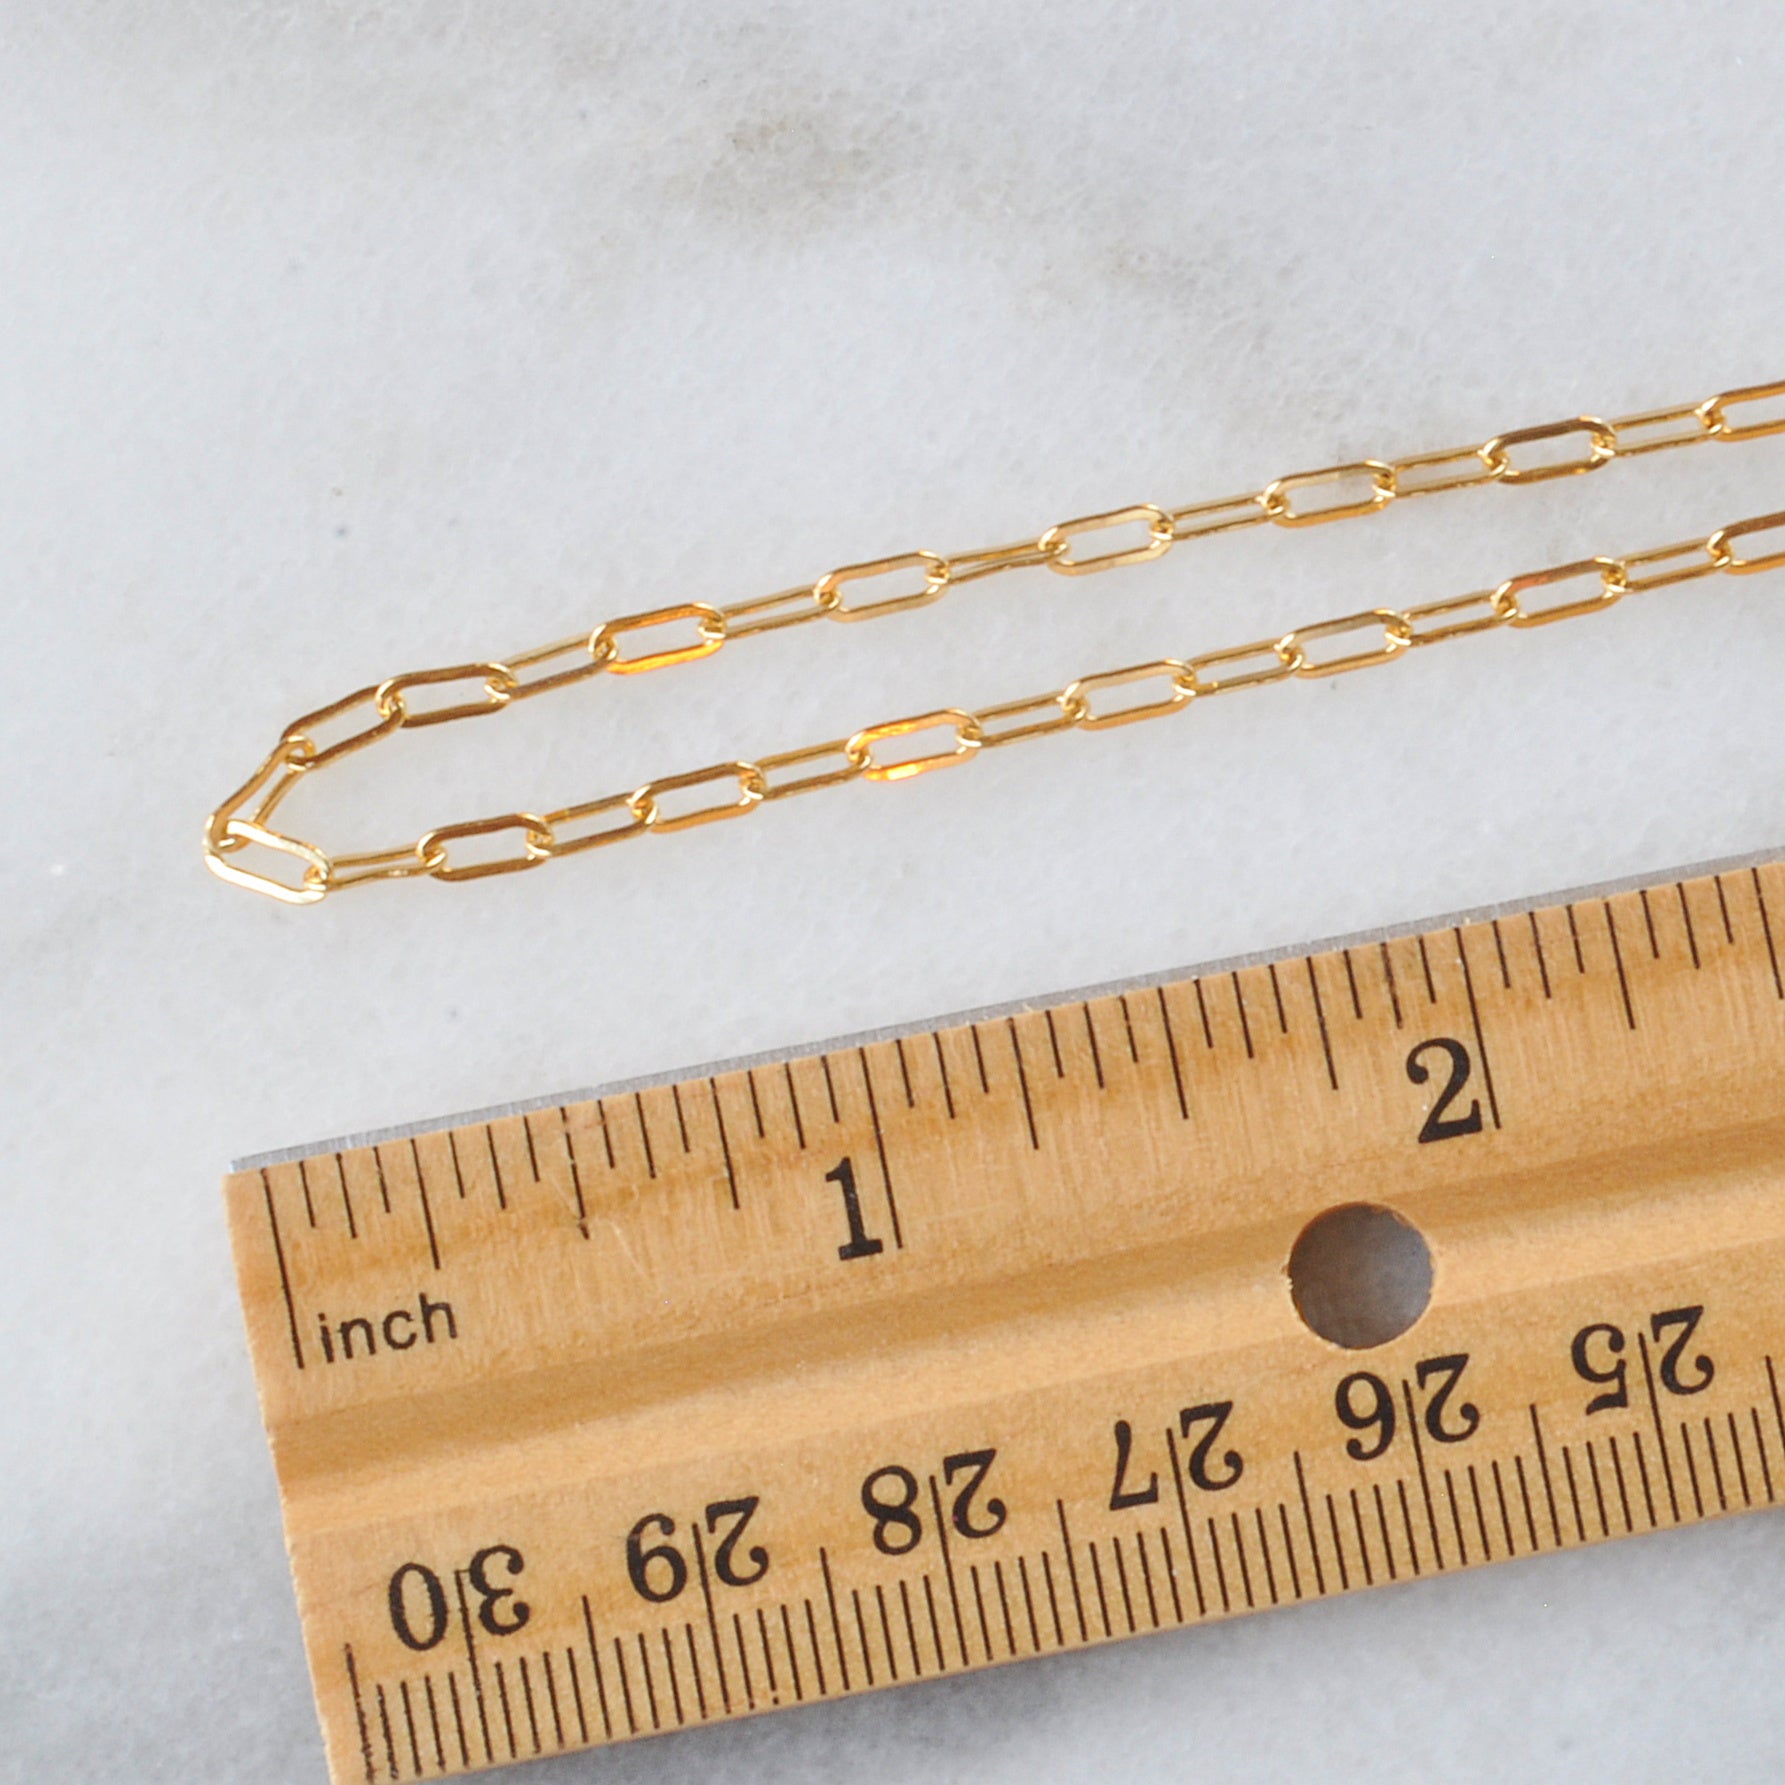 Gold Filled Cable Chain Necklaces